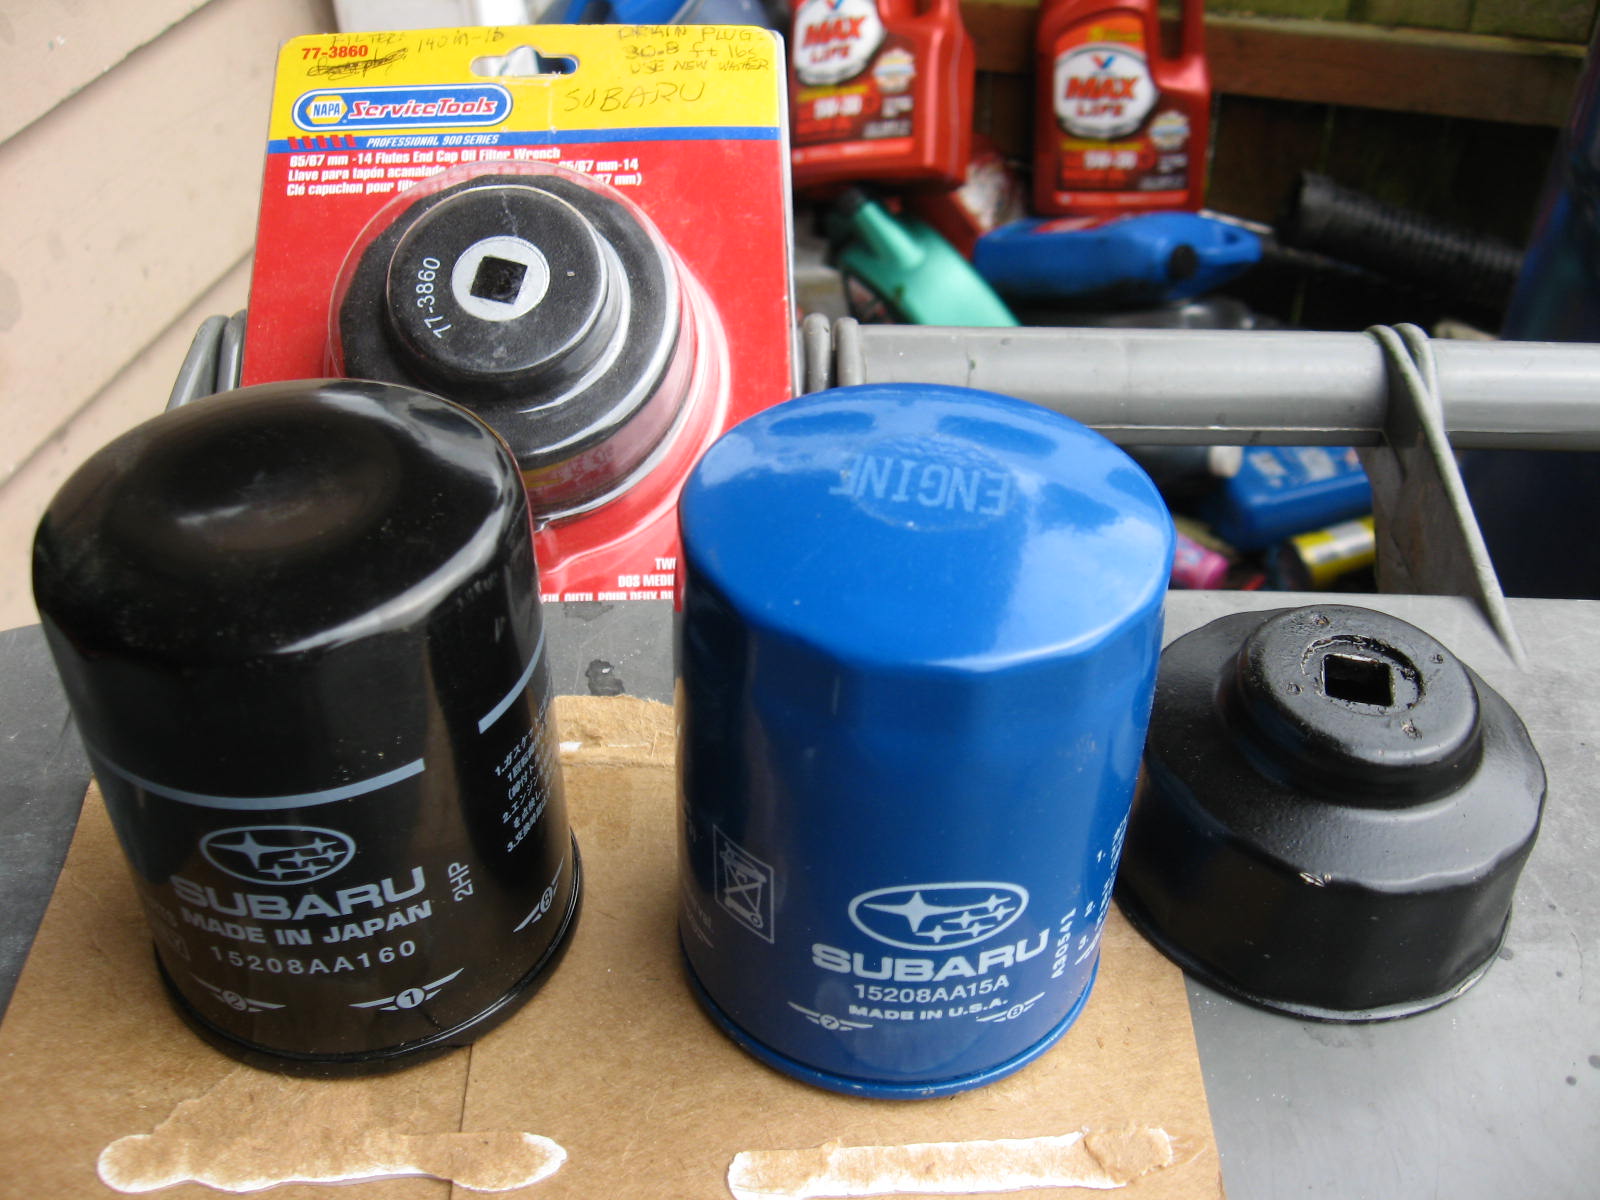 Toyota Oil Filter Cap Wrench